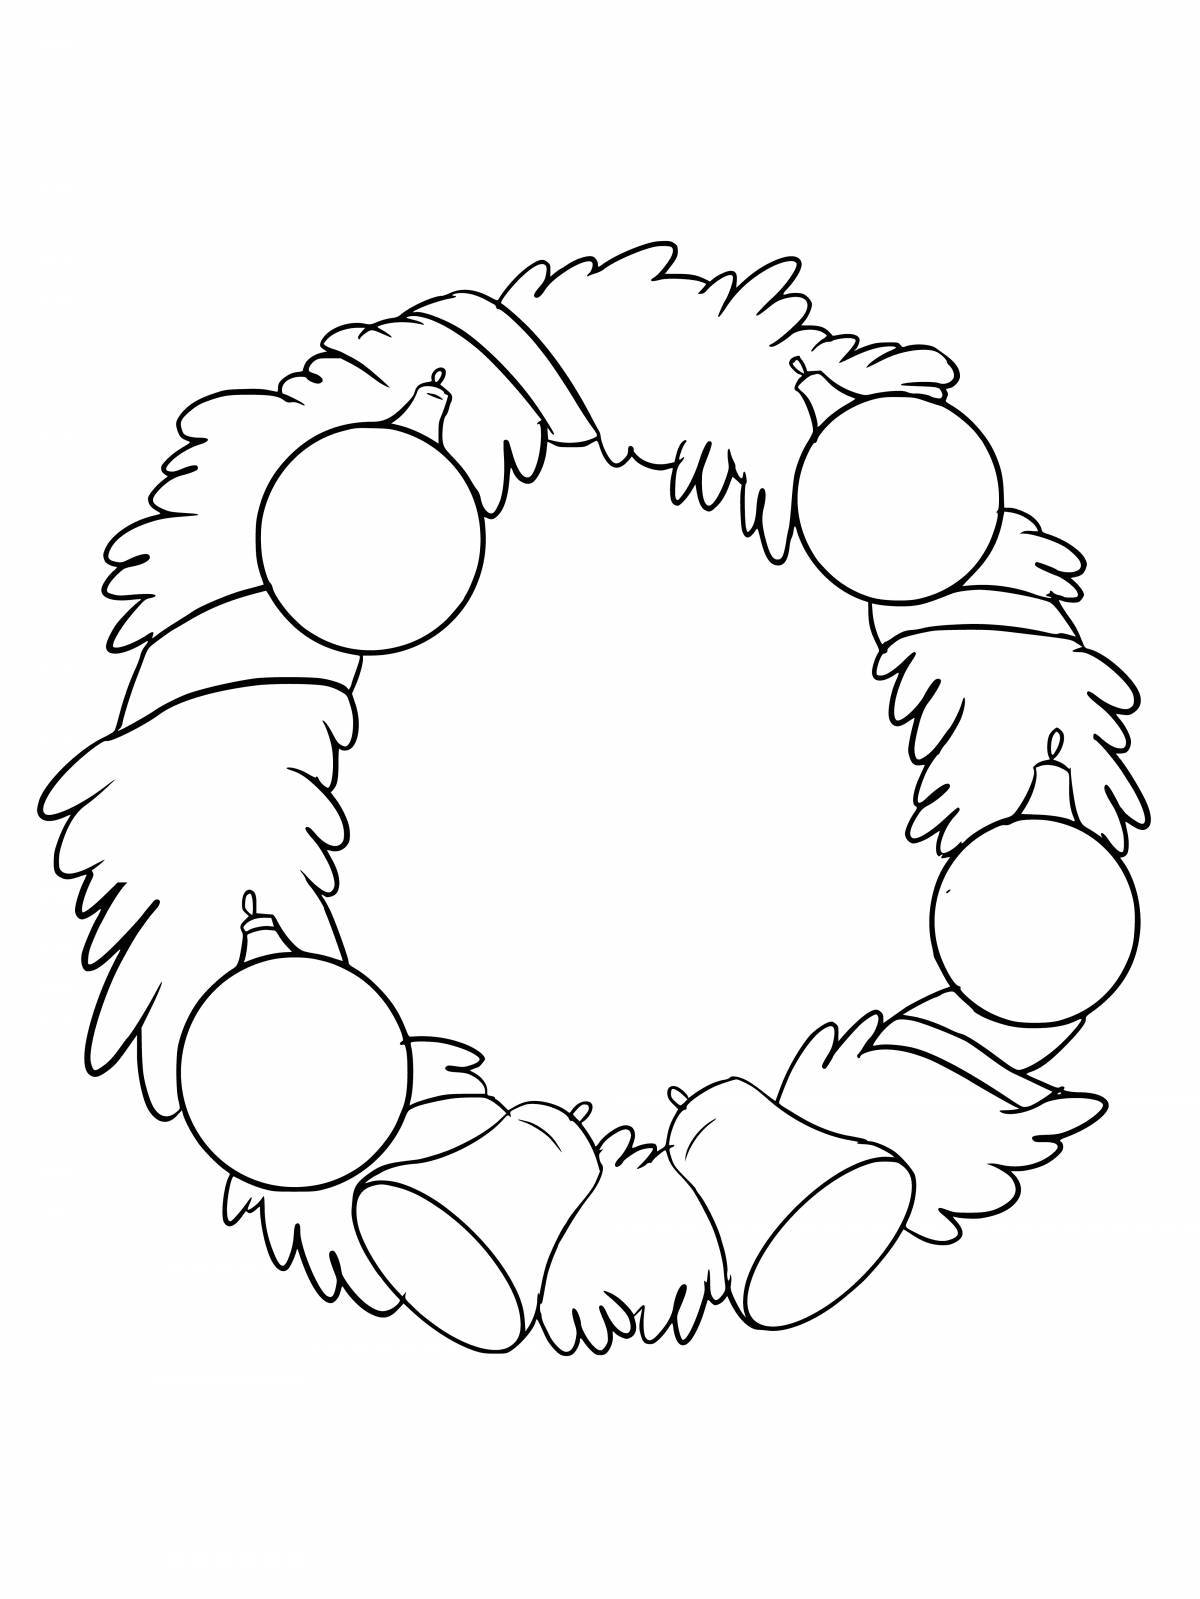 Coloring live Christmas wreath